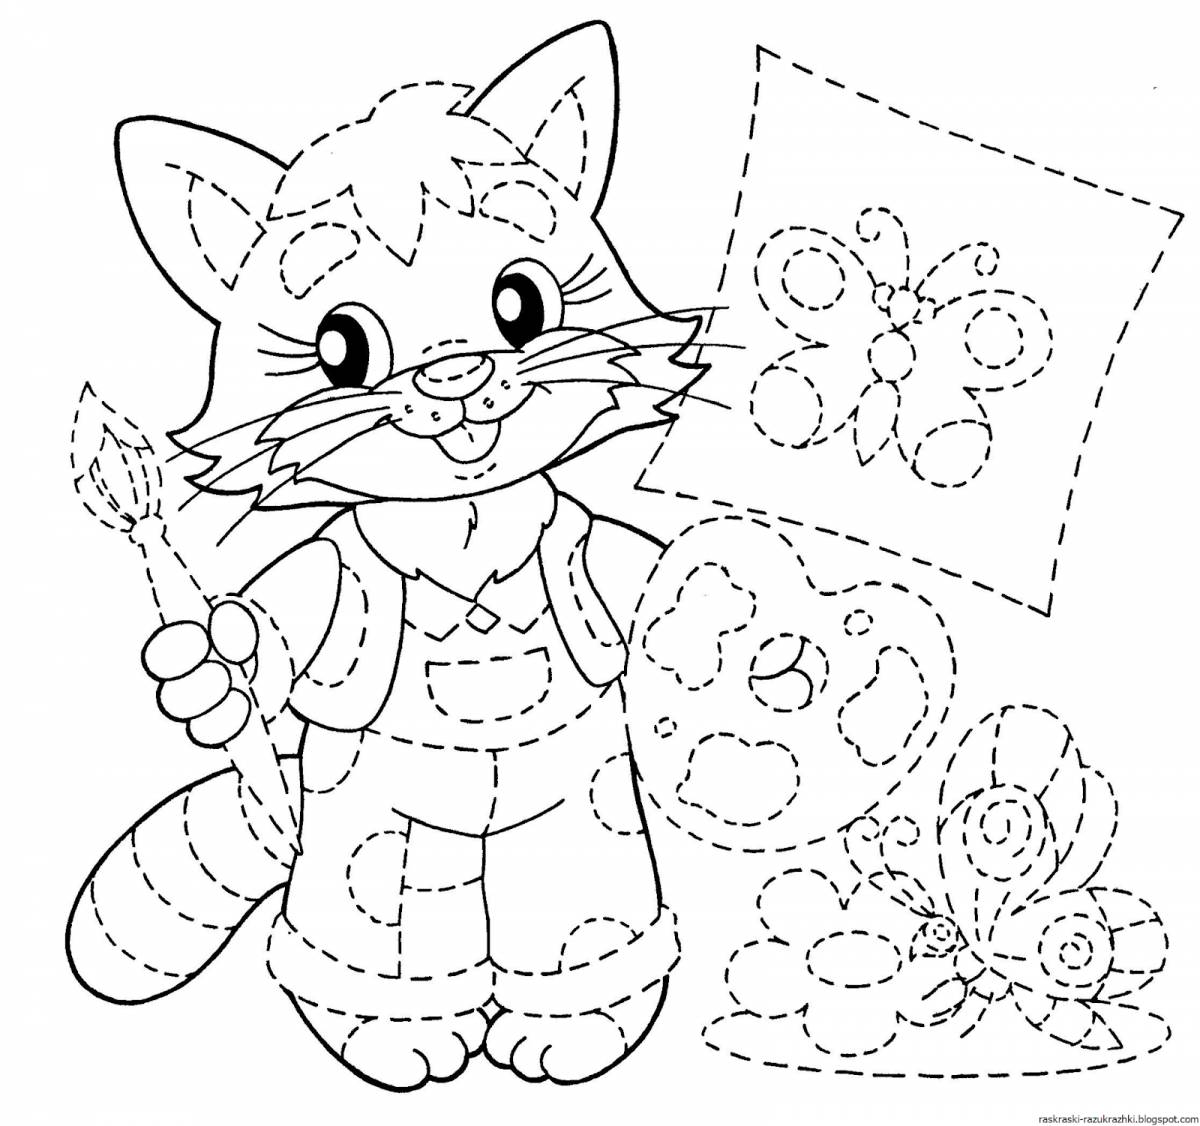 Outstanding craybaby coloring page